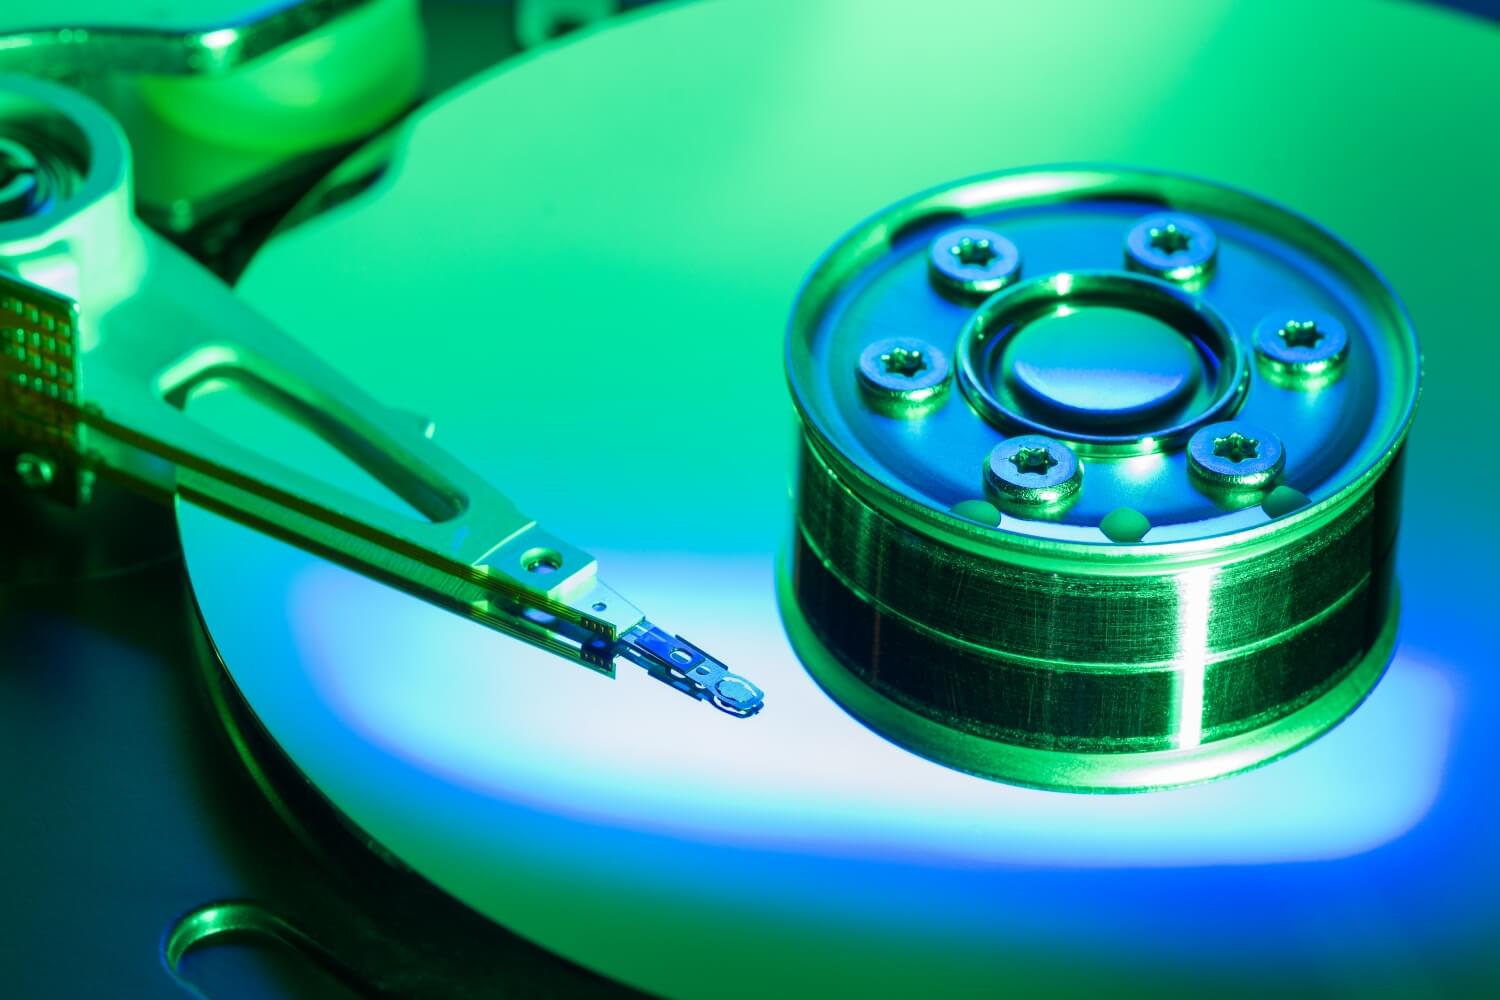 New optical disc tech could make $5 per TB possible